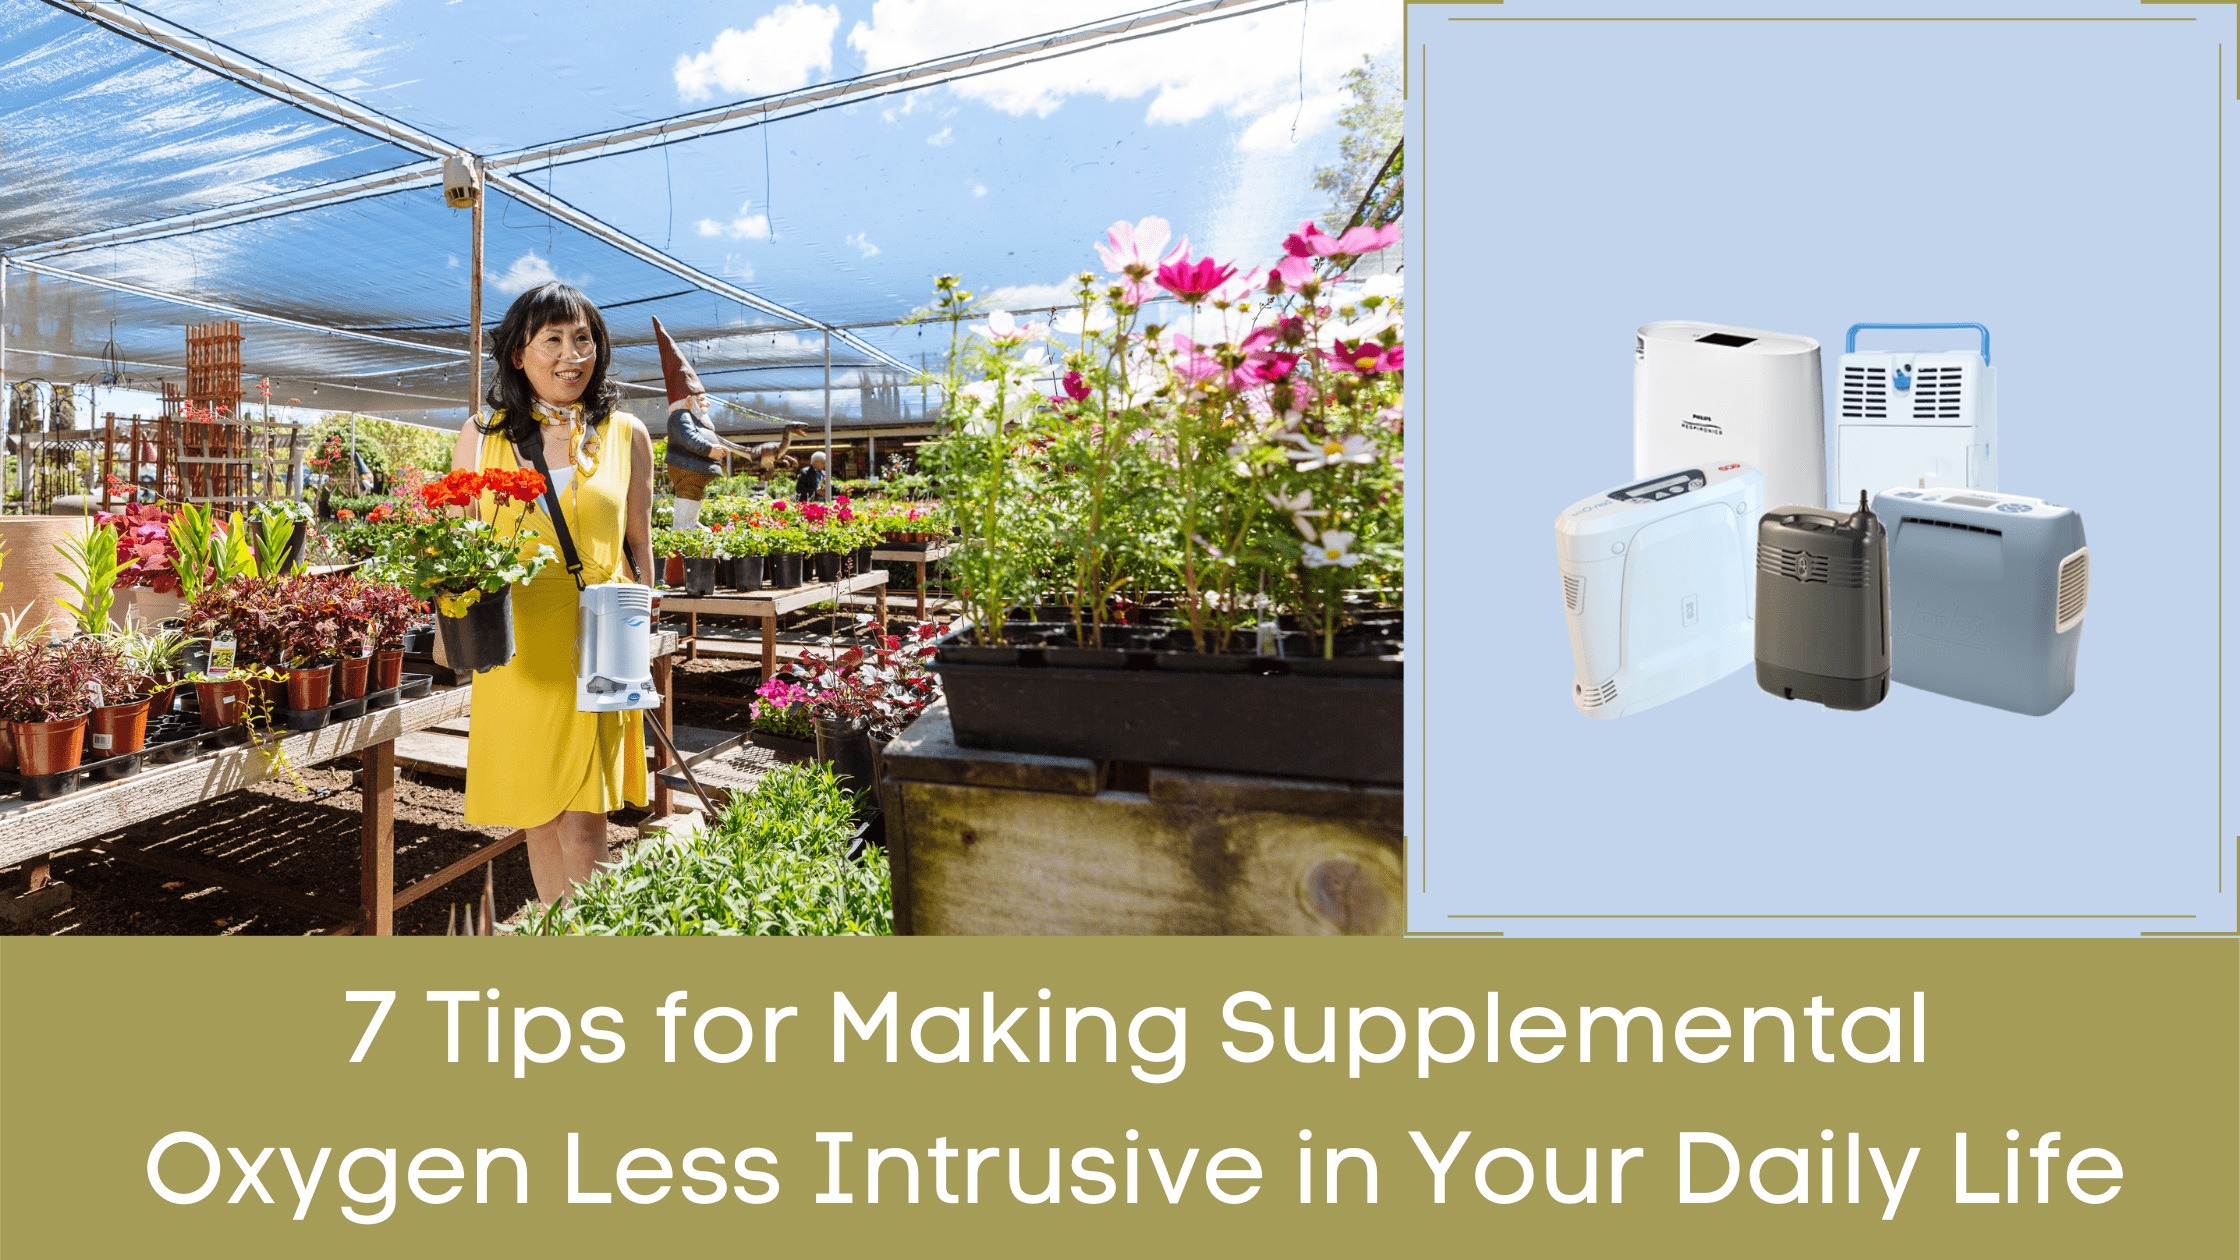 7 Tips for Making Supplemental Oxygen Less Intrusive in Your Daily Life